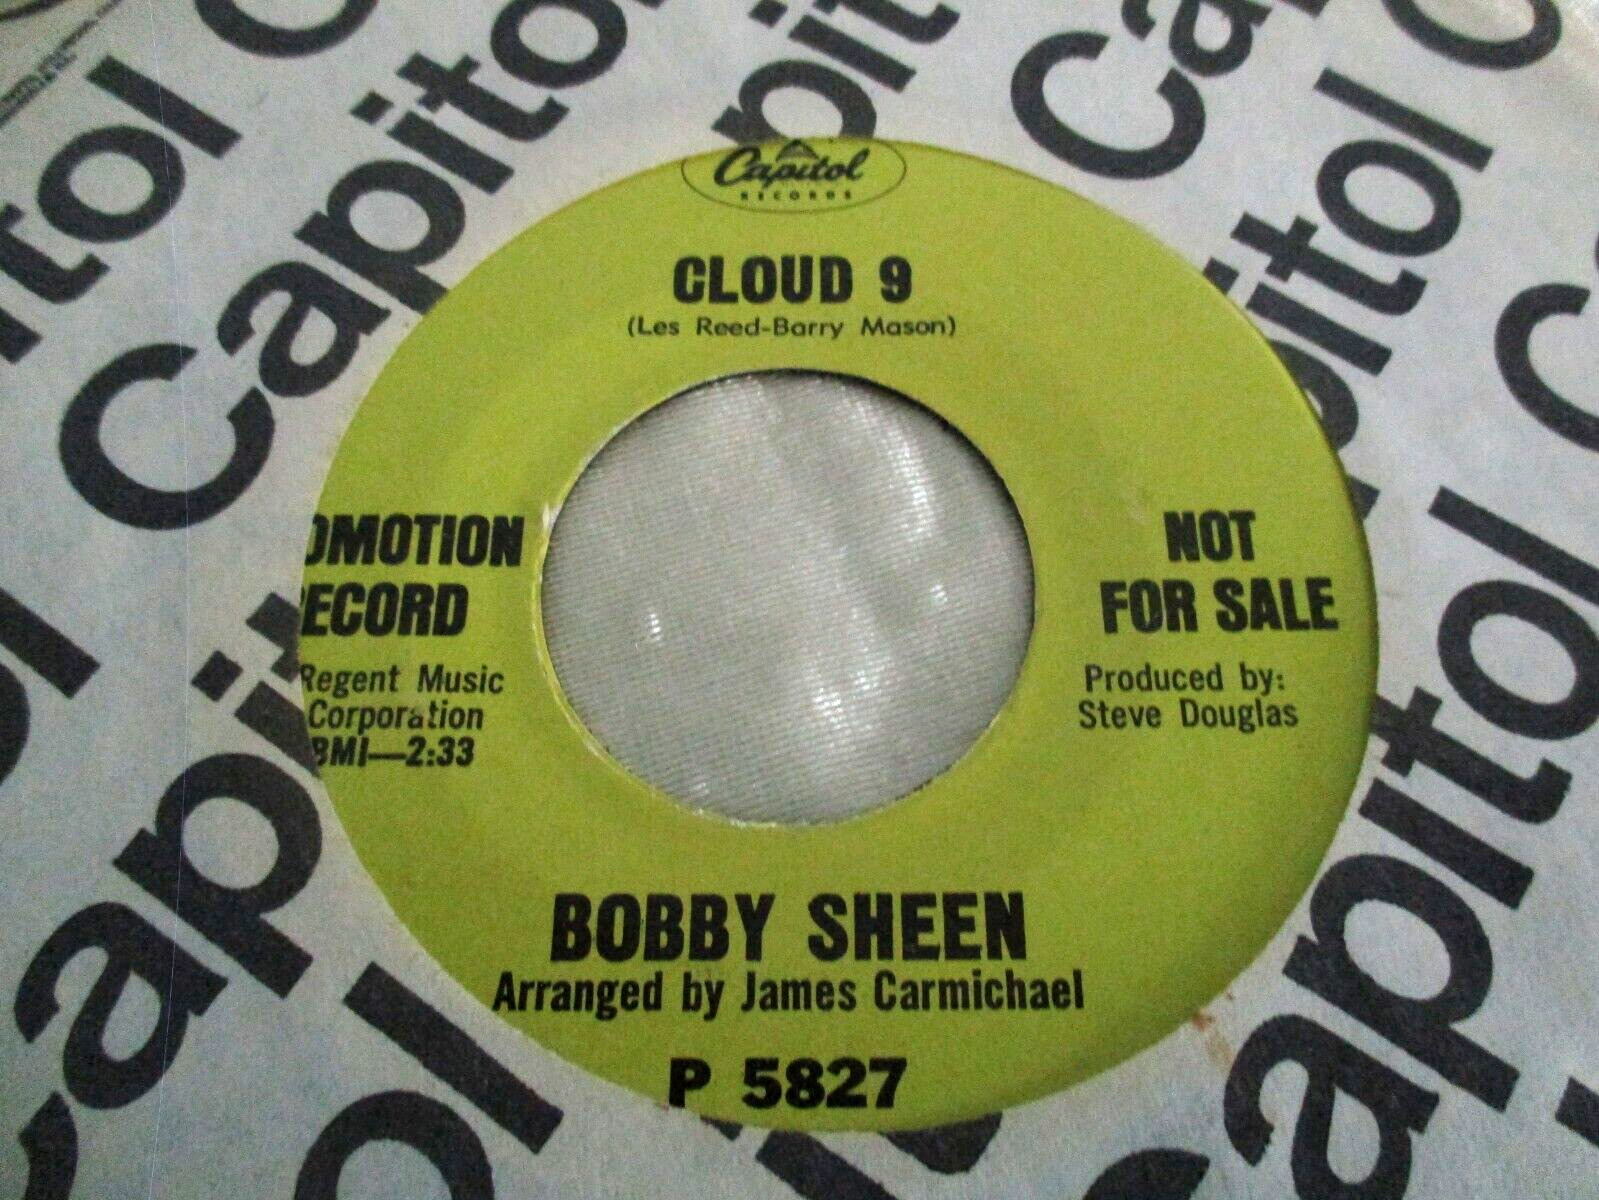 BOBBY SHEEN: Northern Soul / Cloud 9 / I shook the world CAPITOL PROMO 7" 45 RPM